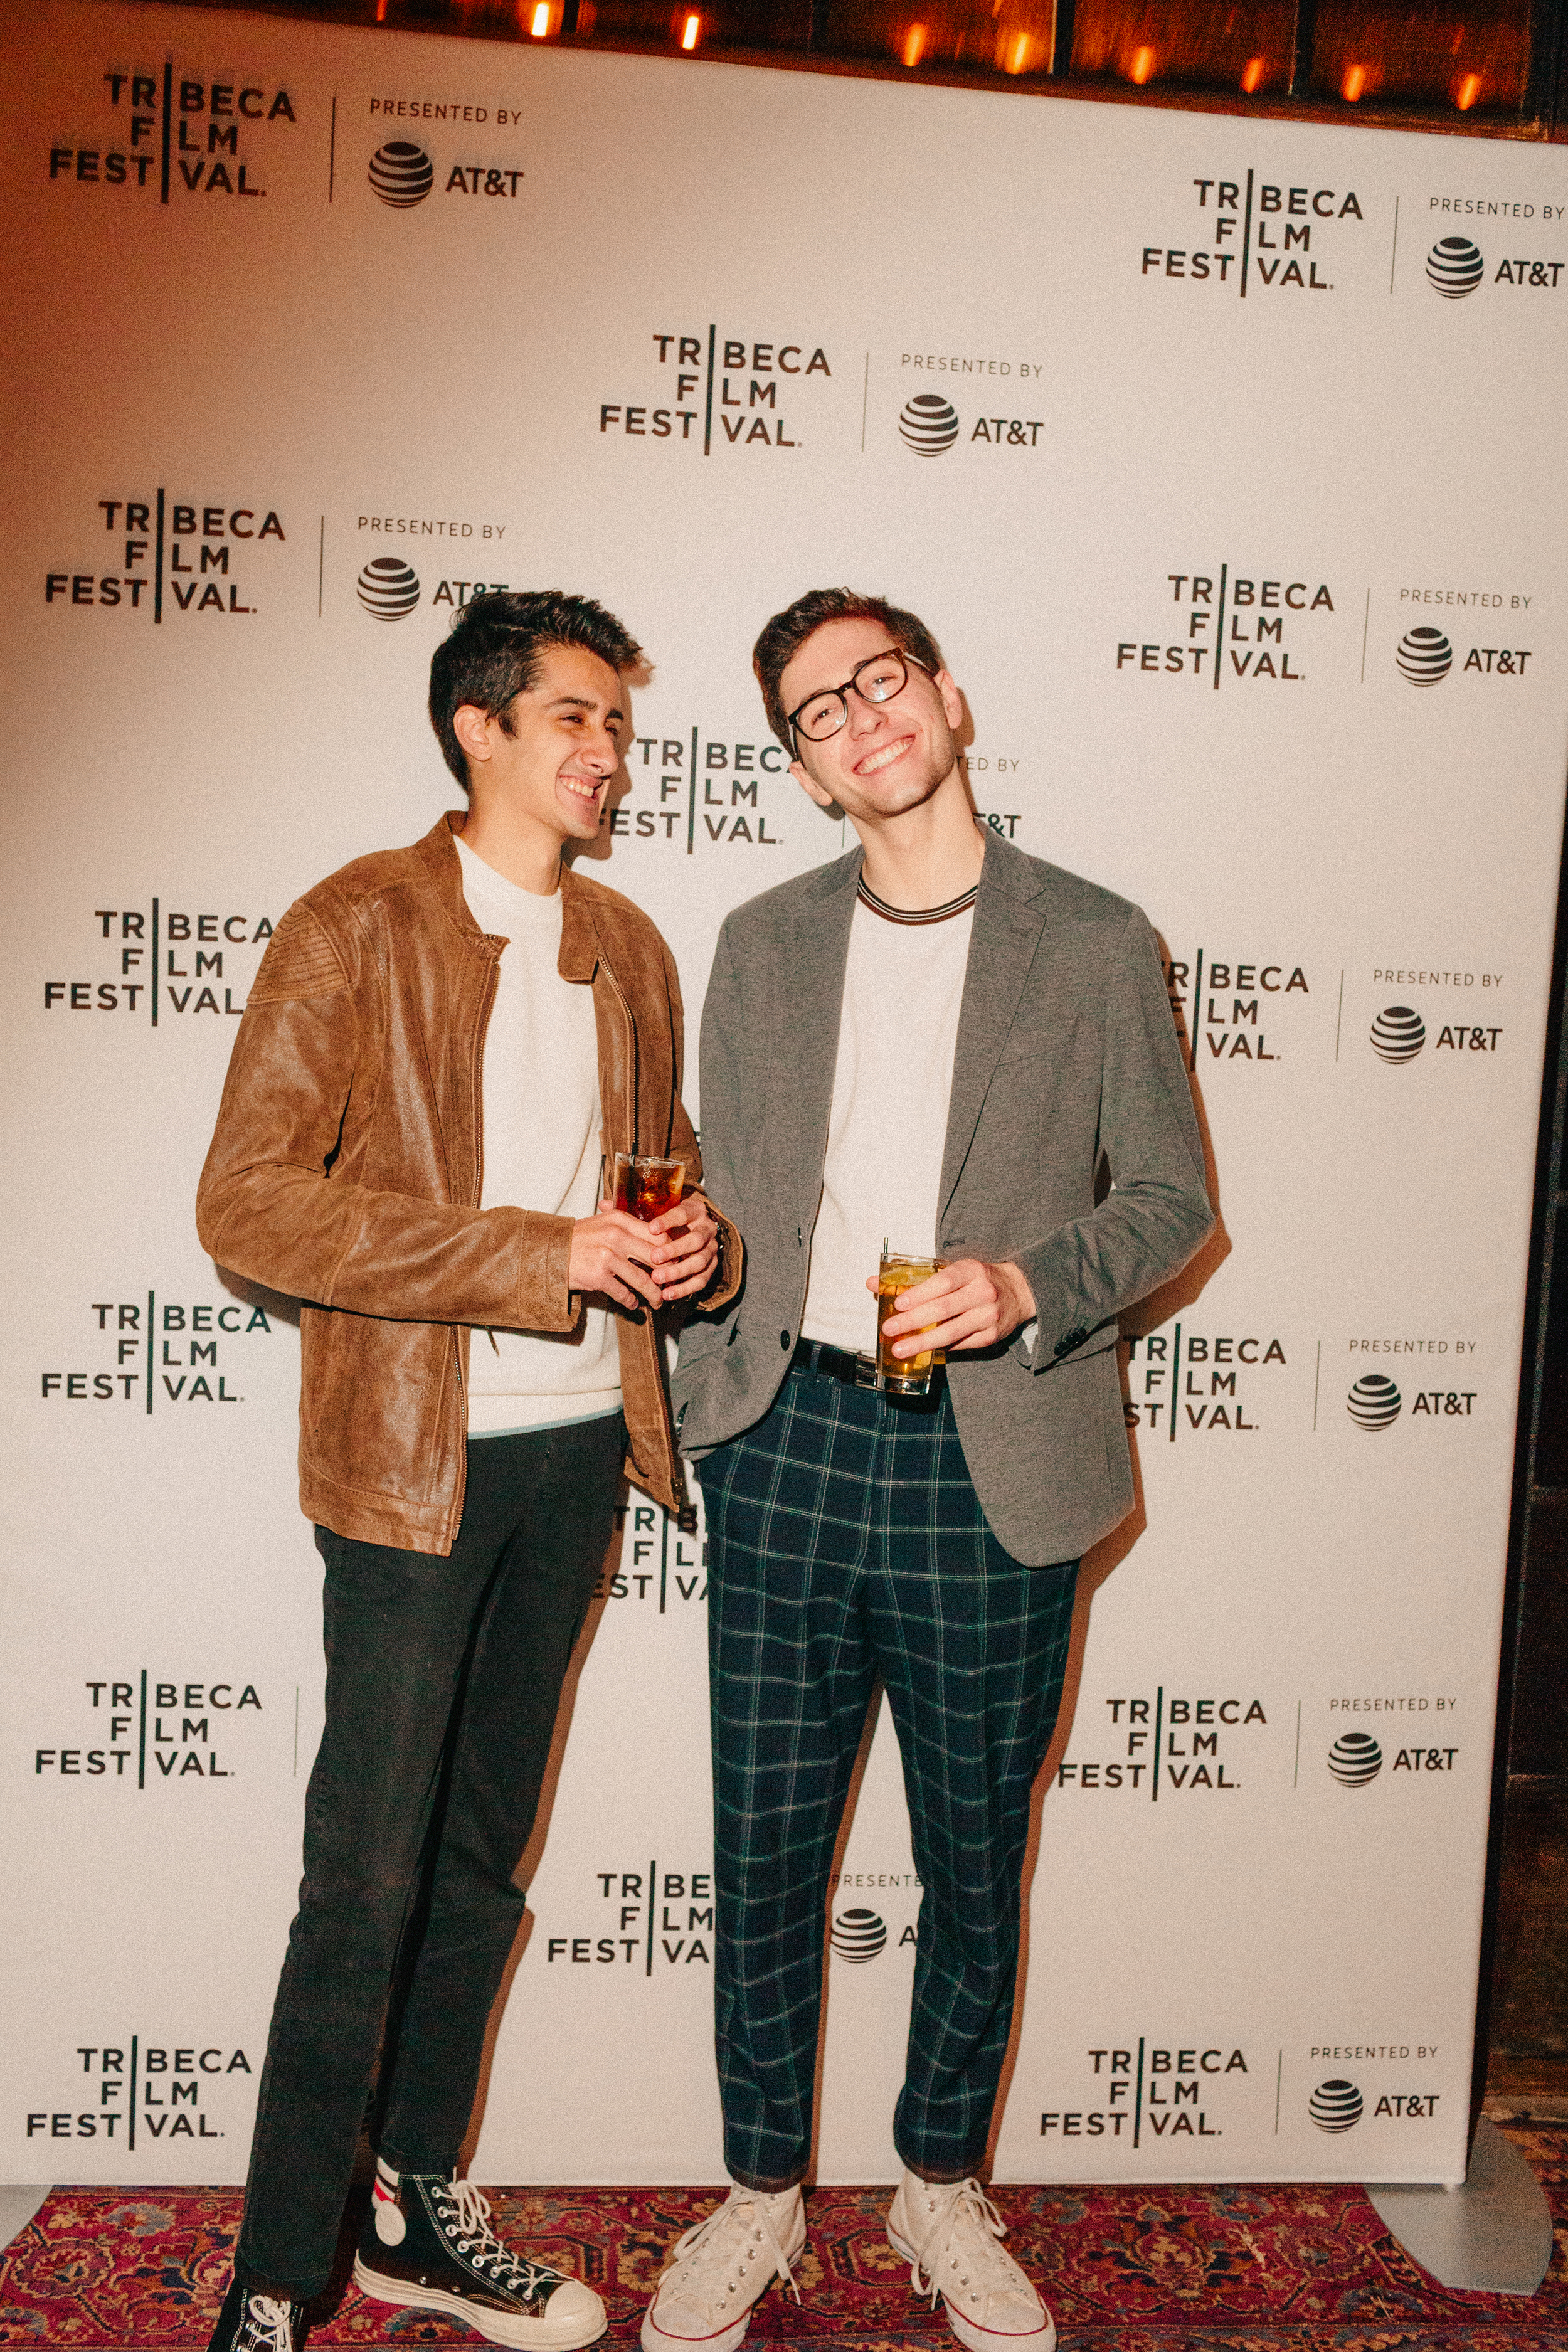   Tribeca Film Festival  New Filmmakers Party Bowery Hotel, New York, 2019 